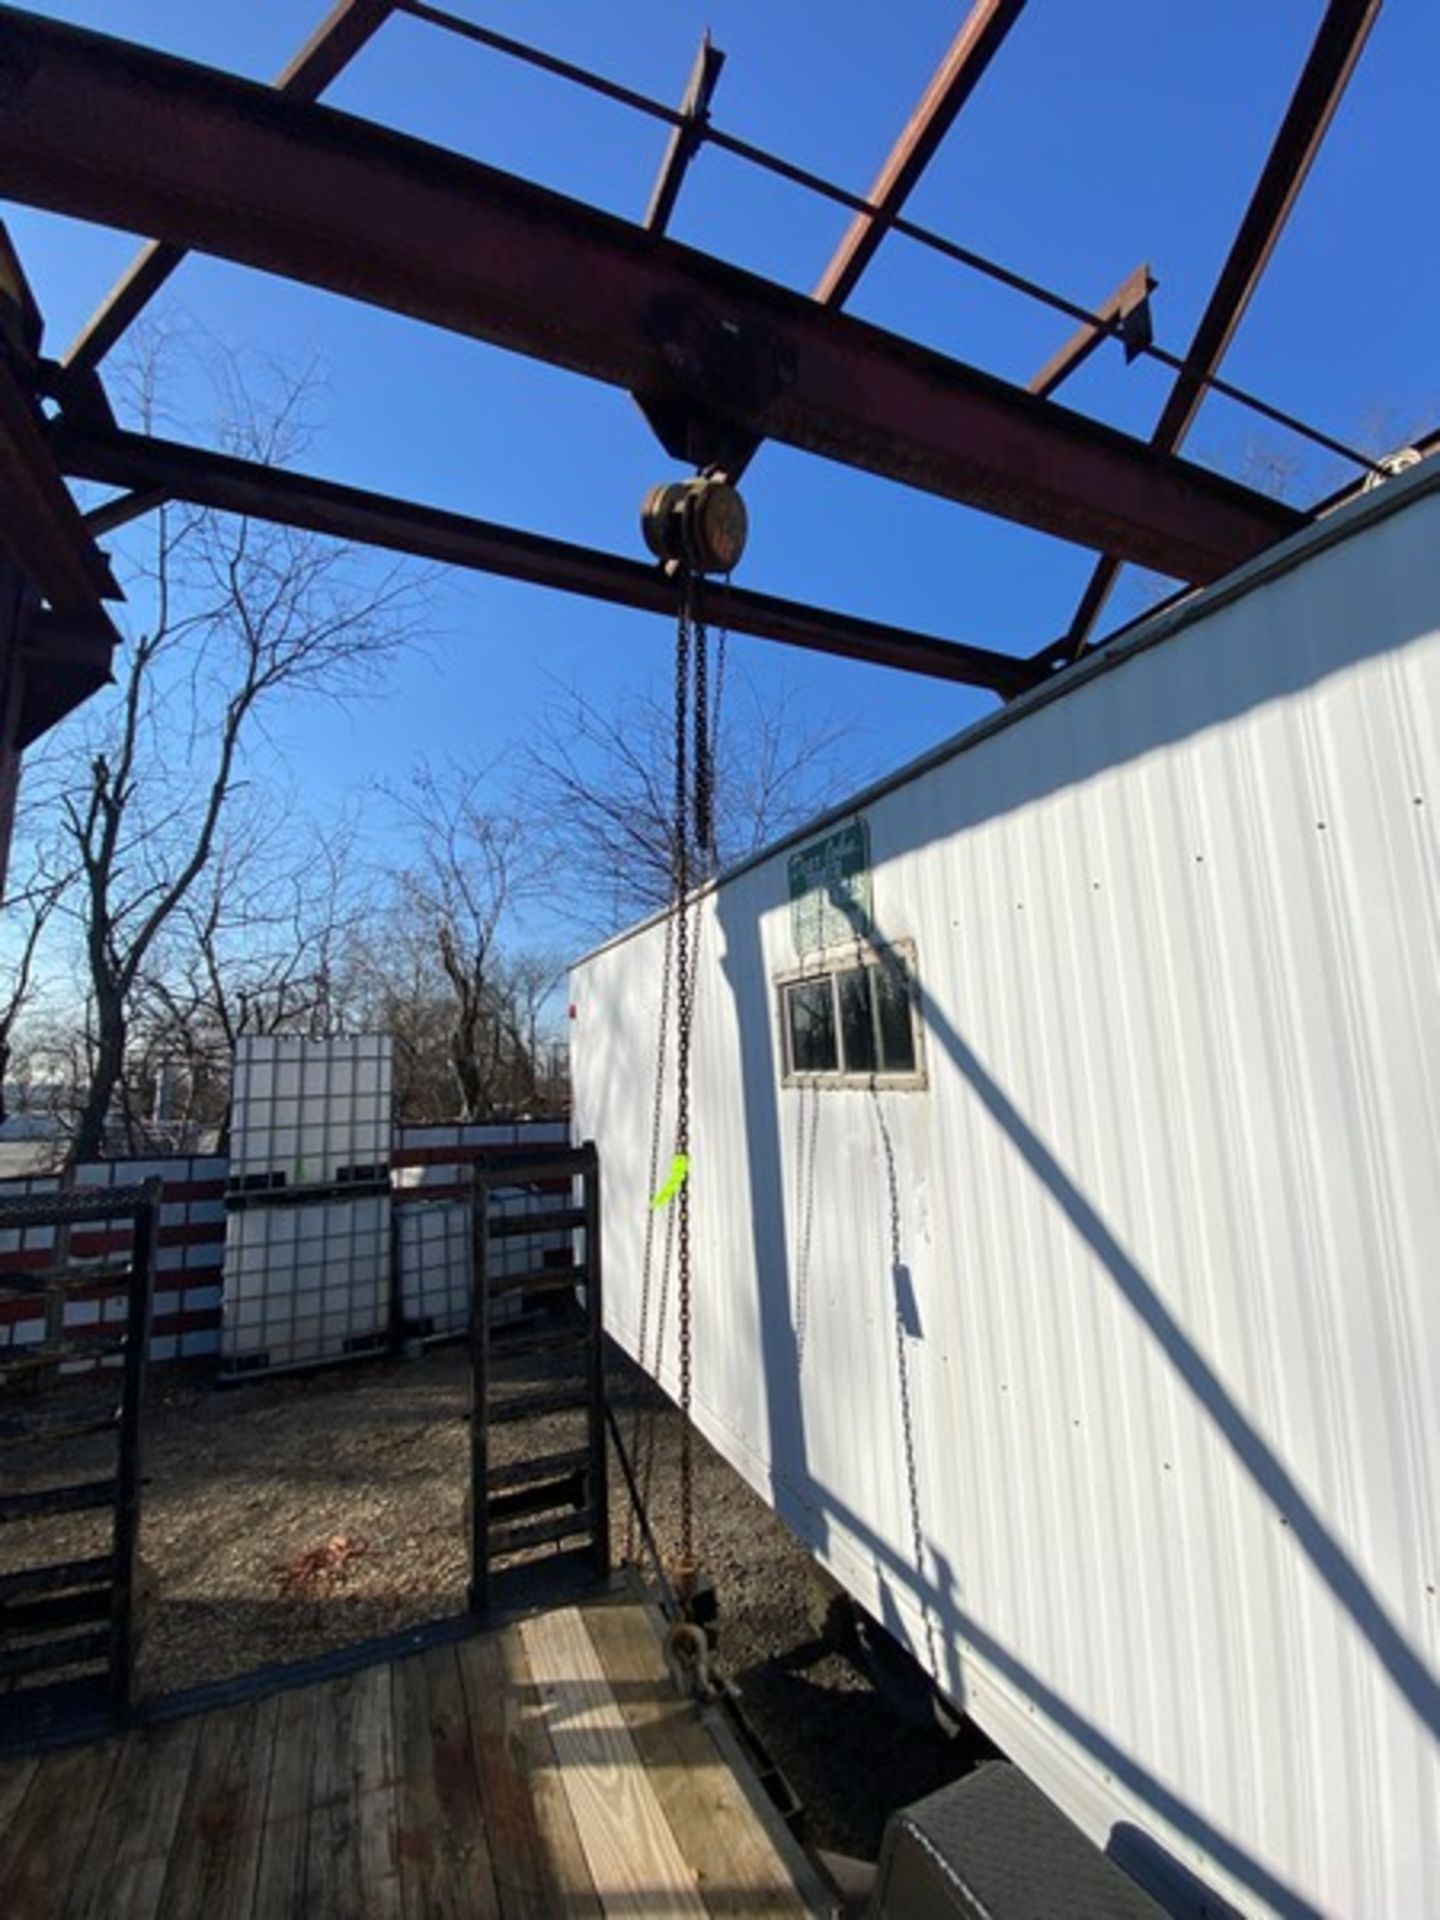 CM Hoist, with Chain (LOCATED IN MONROEVILLE, PA) (RIGGING, LOADING, & SITE MANAGEMENT FEE: $50.00